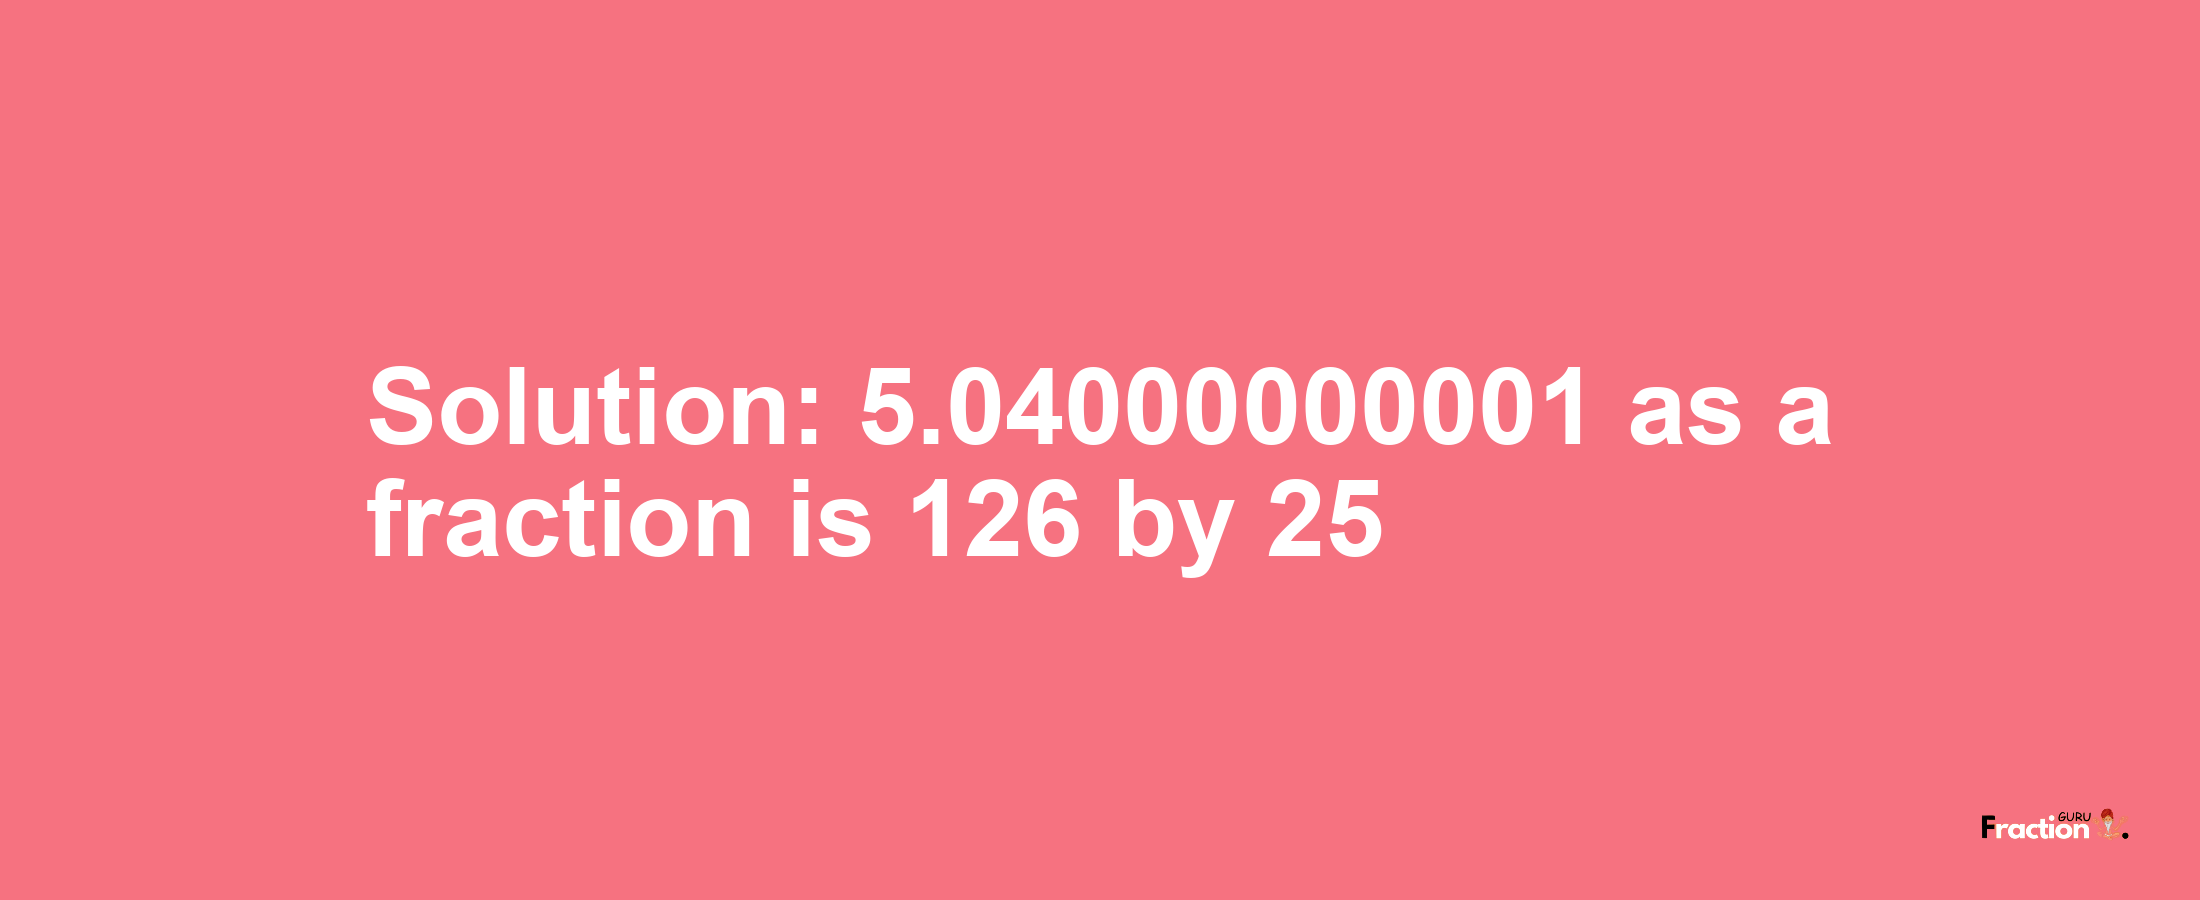 Solution:5.04000000001 as a fraction is 126/25